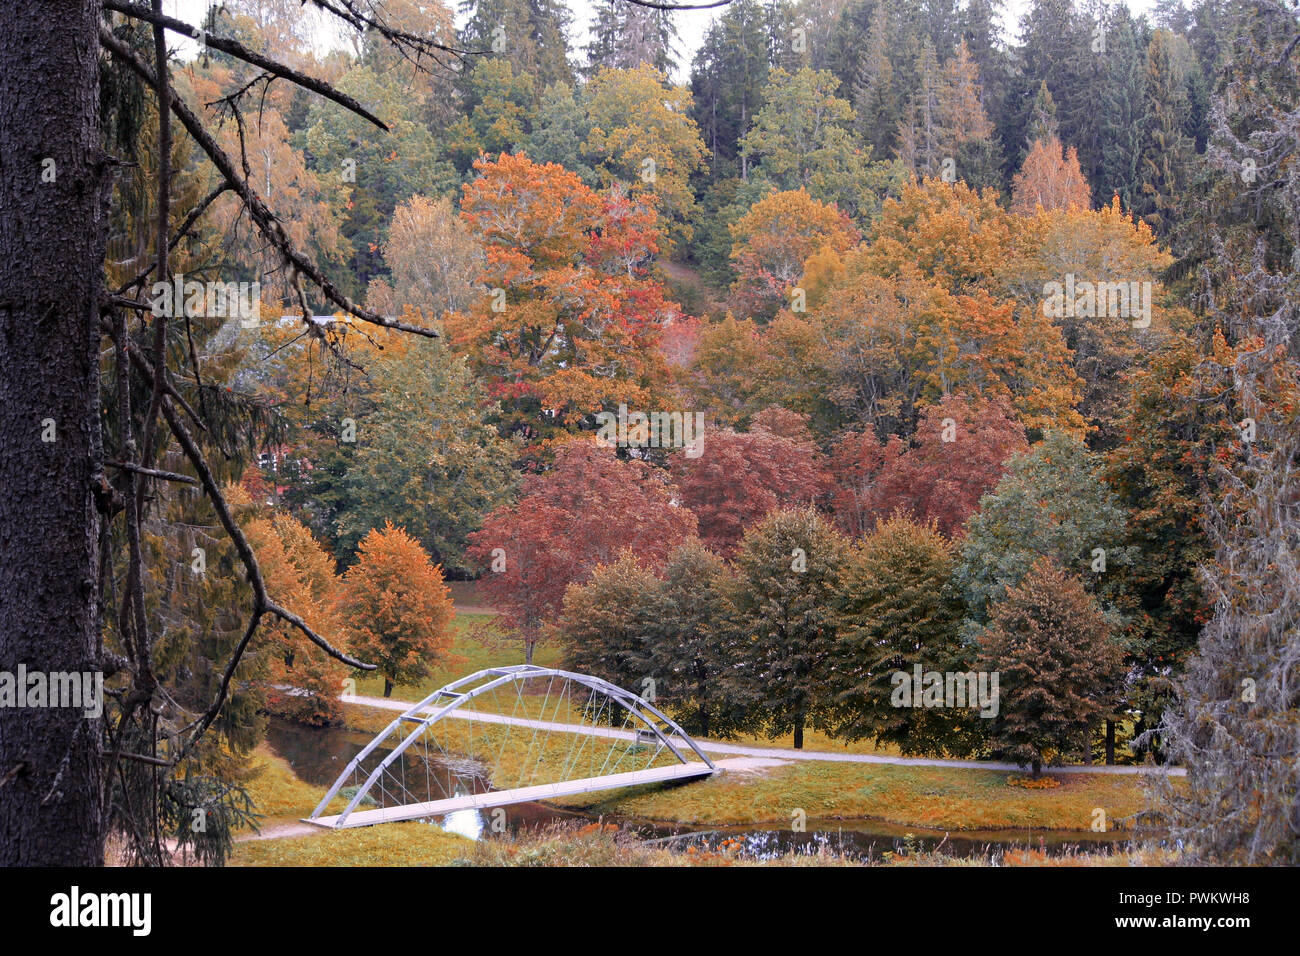 autumn landscape, colorful trees and yellow grass, in the foreground a pine trunk, a narrow river and a small bridge, photo above, Stock Photo